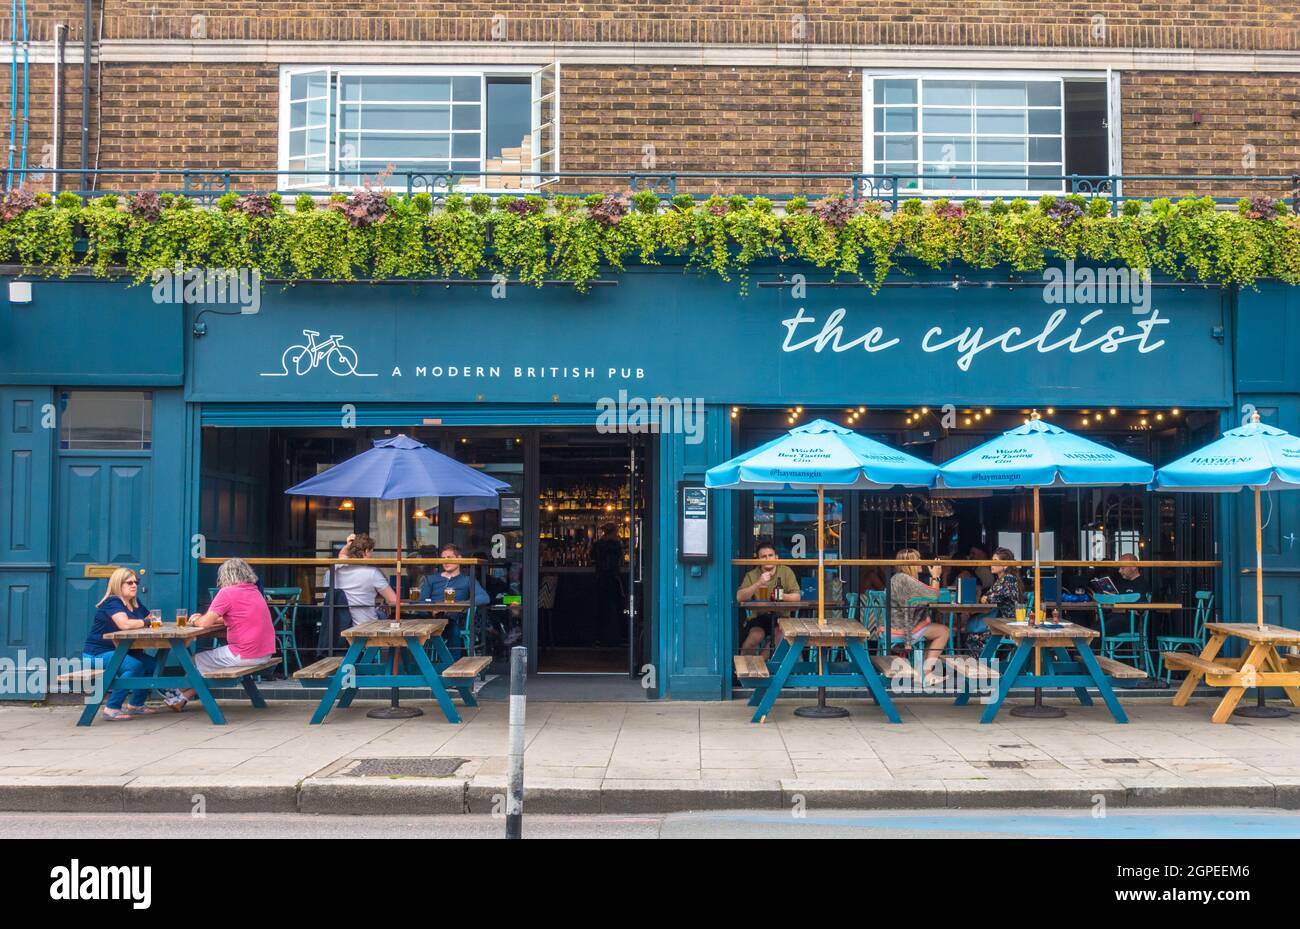 The Cyclist – a modern British pub - with people sitting at tables inside and outside, in Balham, London, SW12, England, UK. Stock Photo